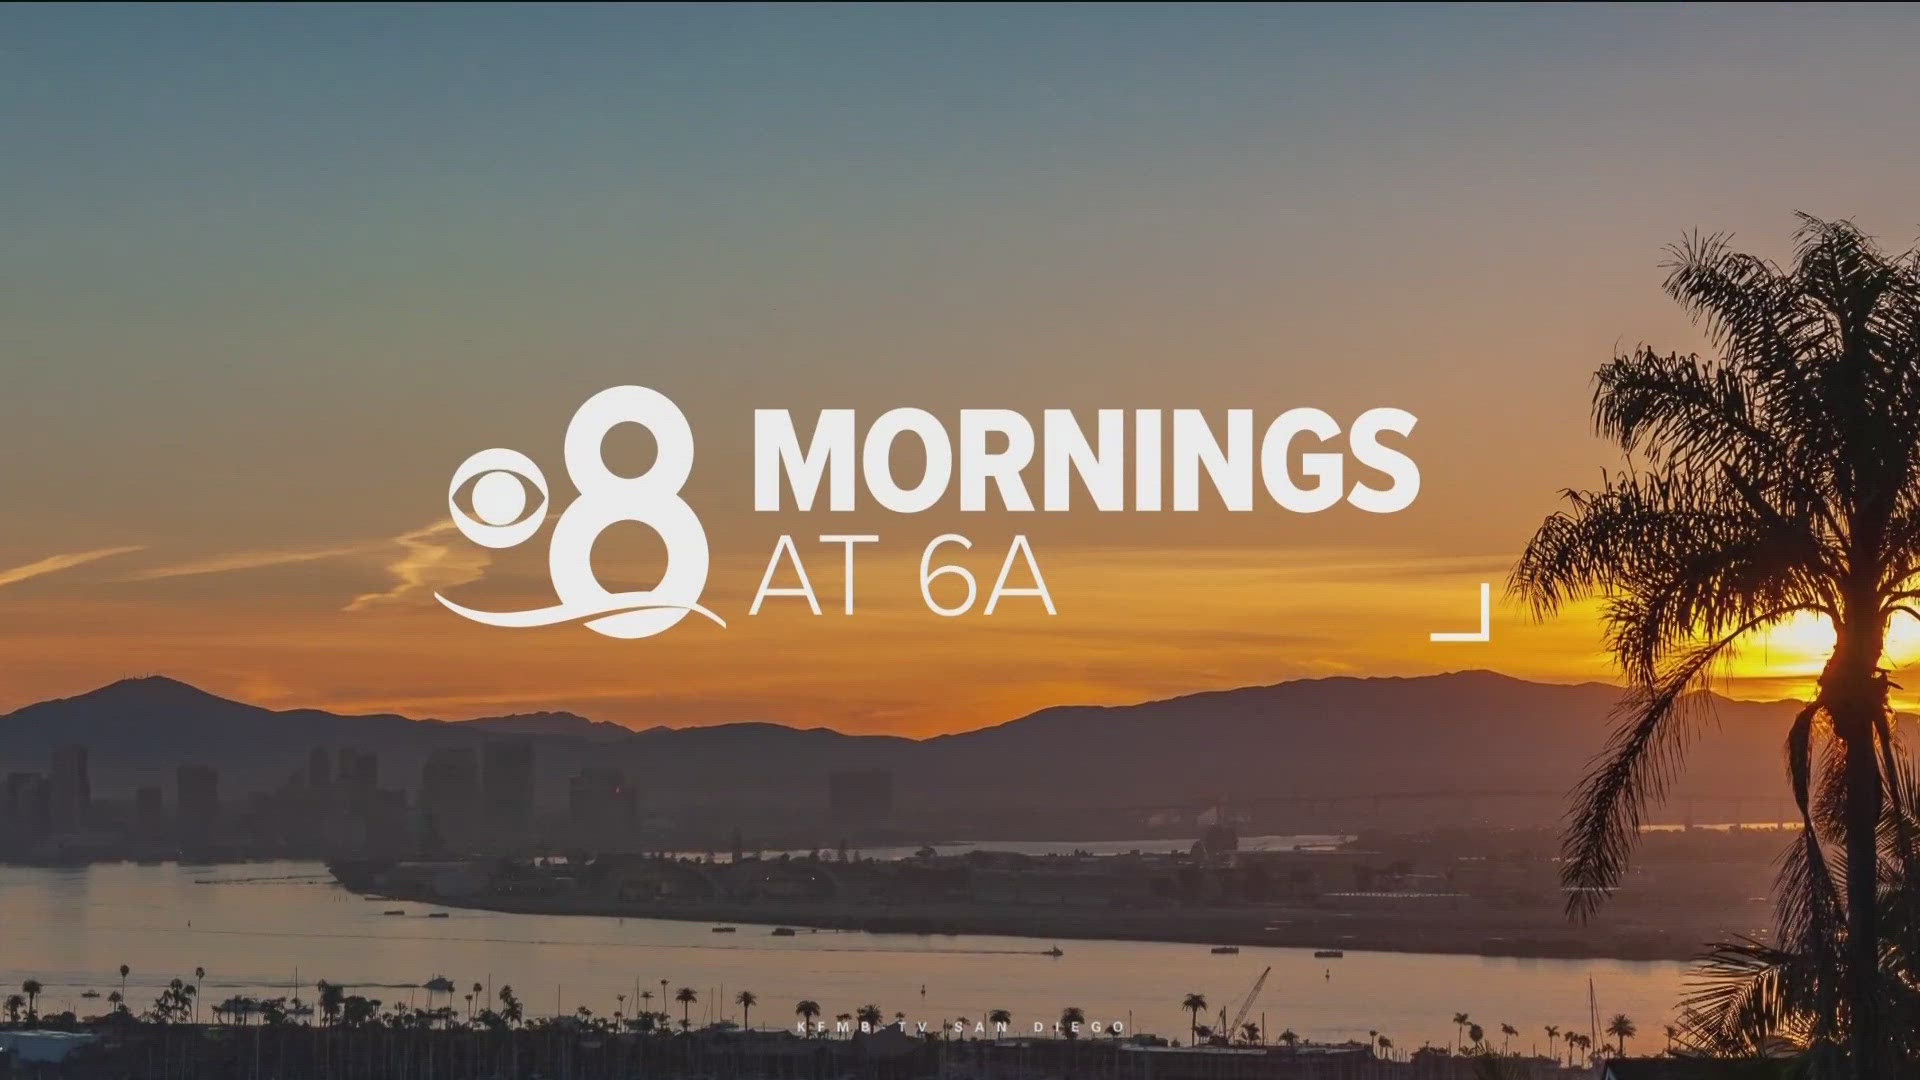 Here are the top stories around San Diego County for the morning of Tuesday, May 21.
For the latest news, weather and sports, head to:
https://www.cbs8.com/